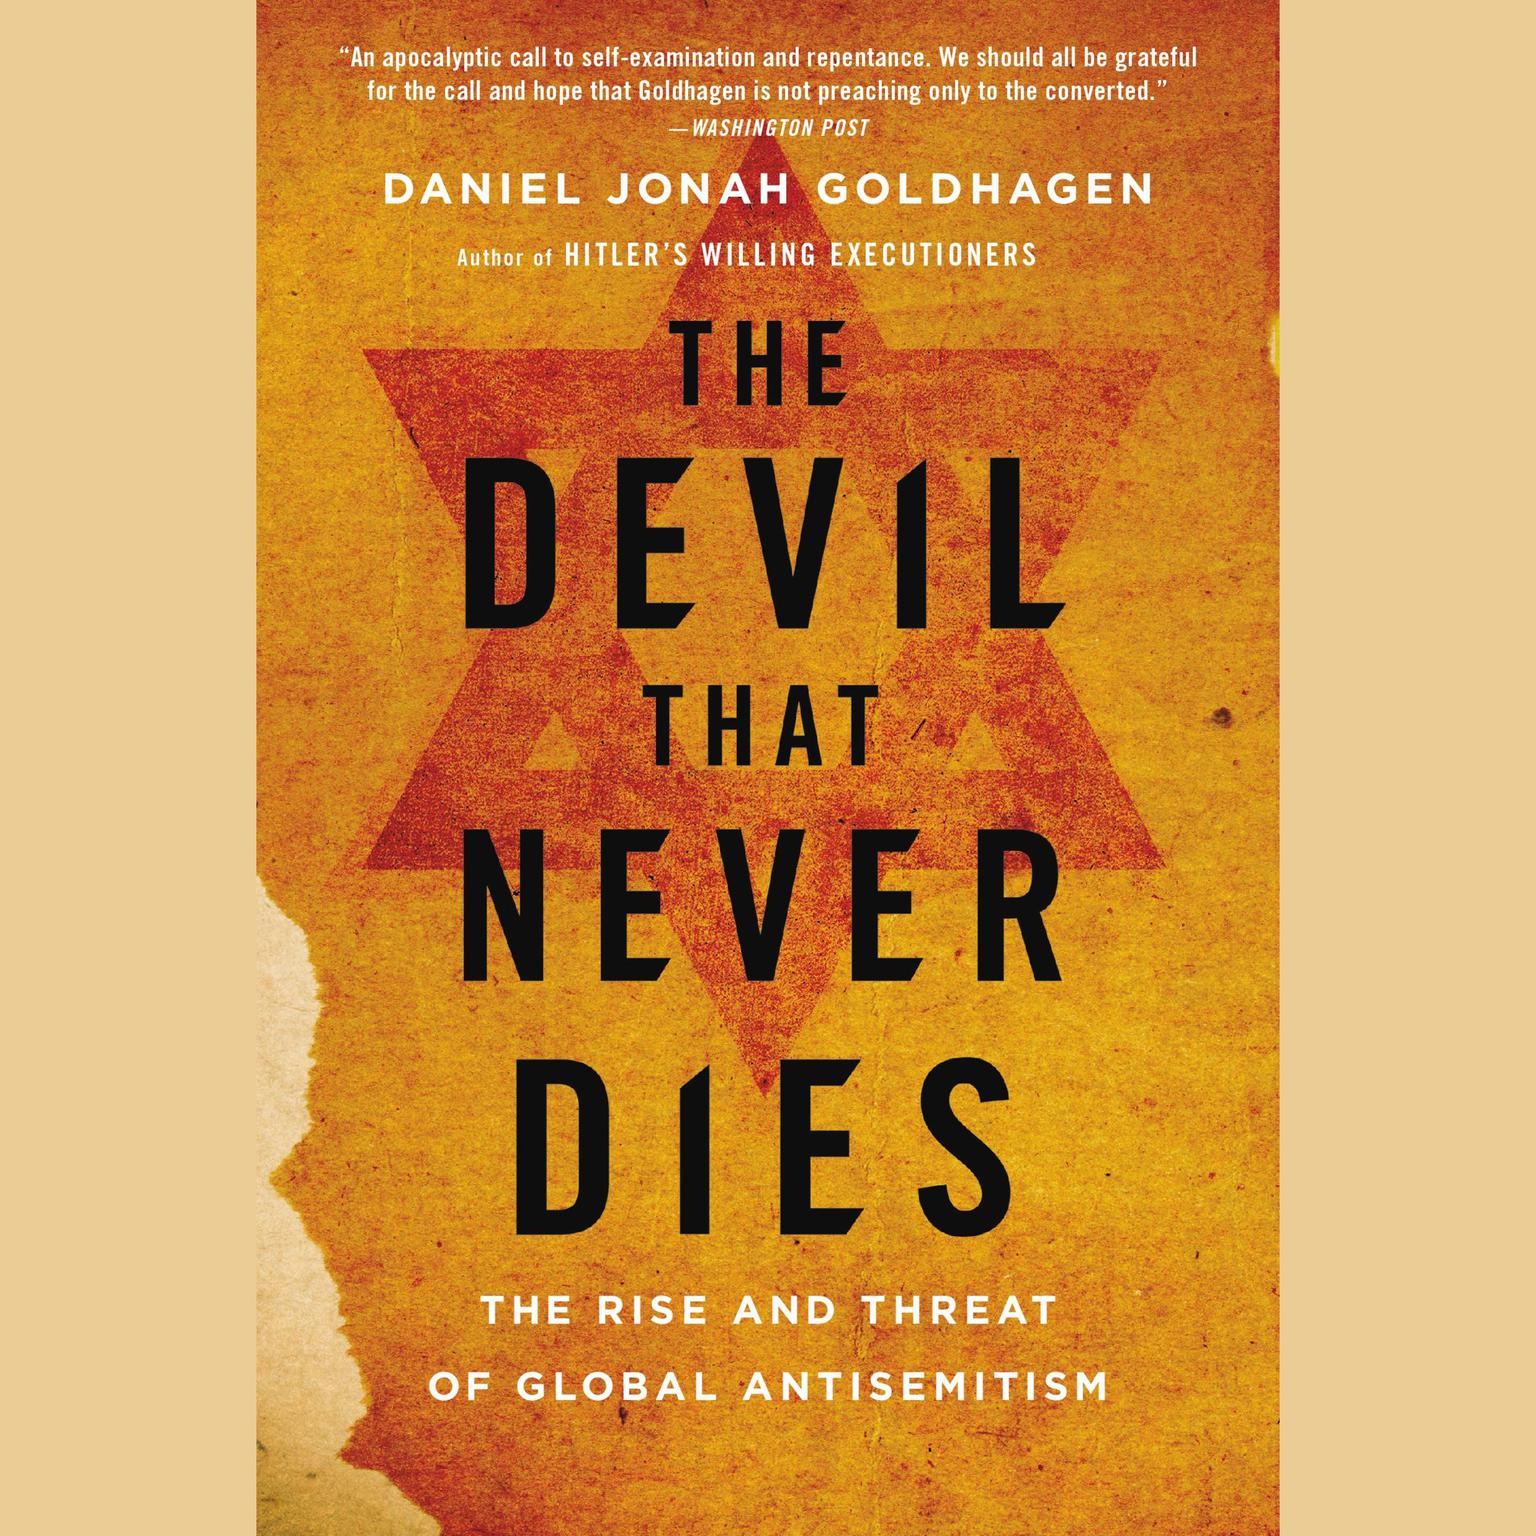 The Devil That Never Dies: The Rise and Threat of Global Antisemitism Audiobook, by Daniel Jonah Goldhagen